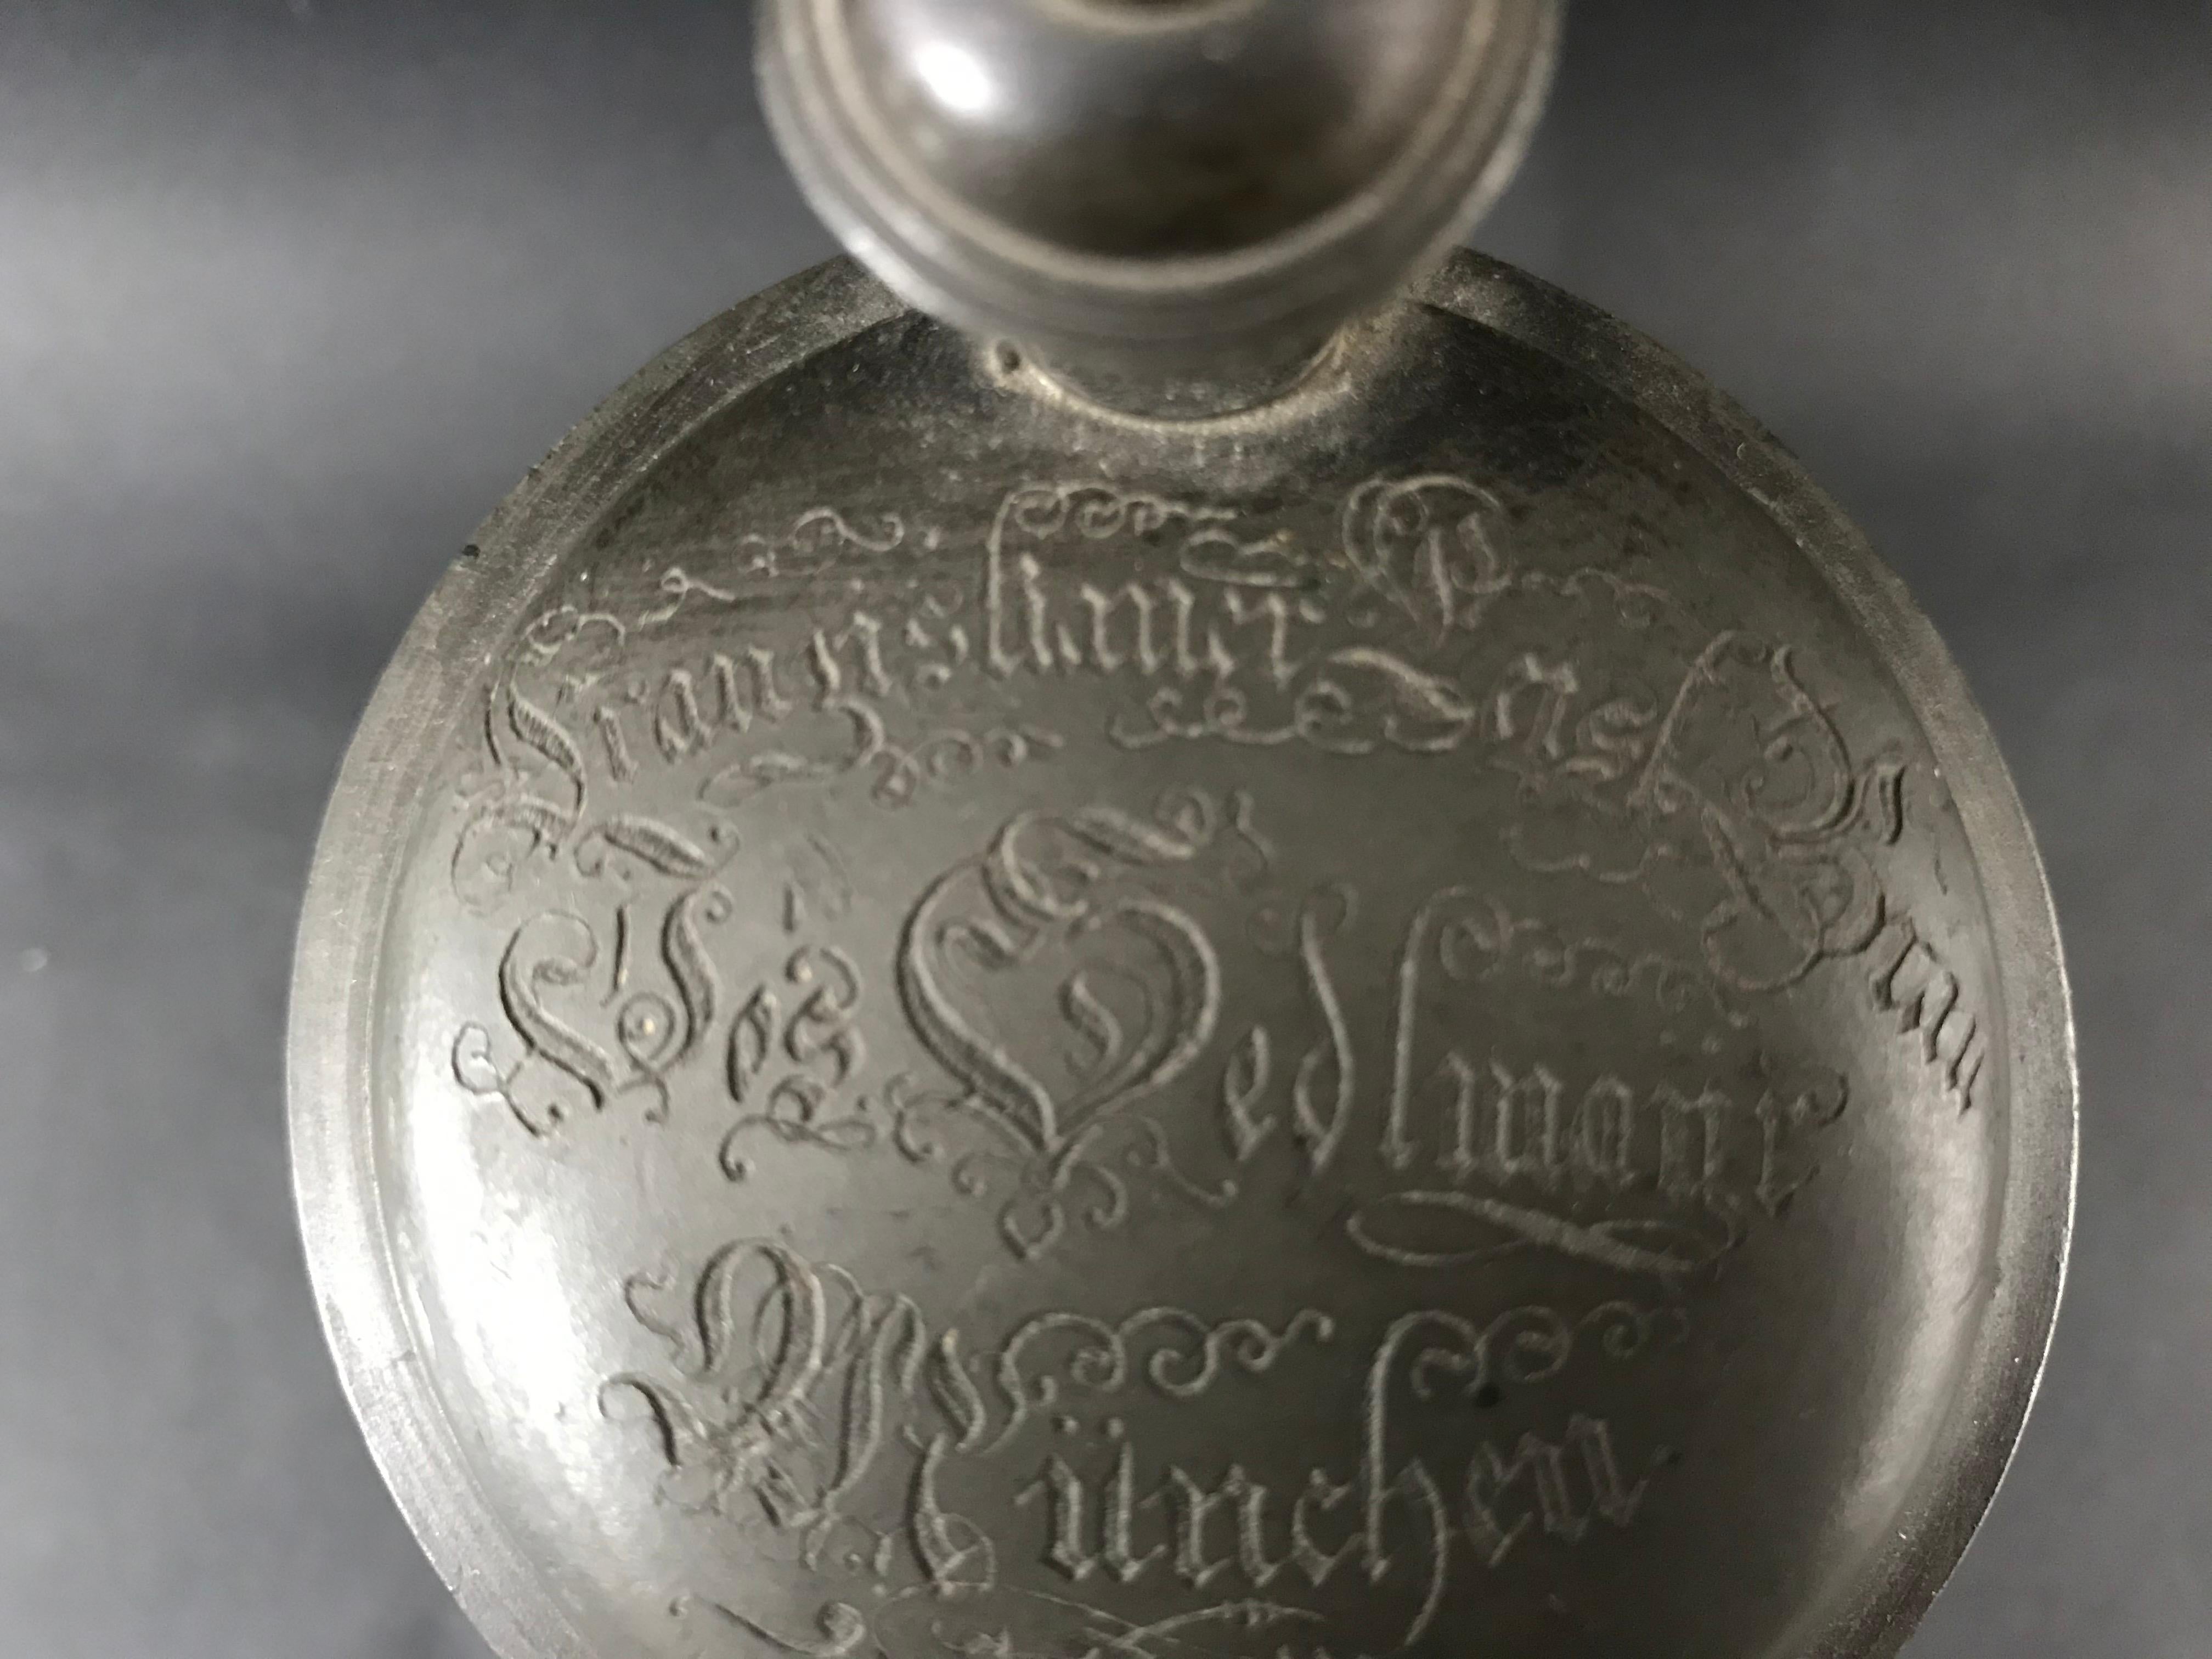 Old German beer mug with its finely engraved pewter lid.
Big mug in pewter and terracotta. It is engraved on the pewter lid with Germanic phrases: We can read 